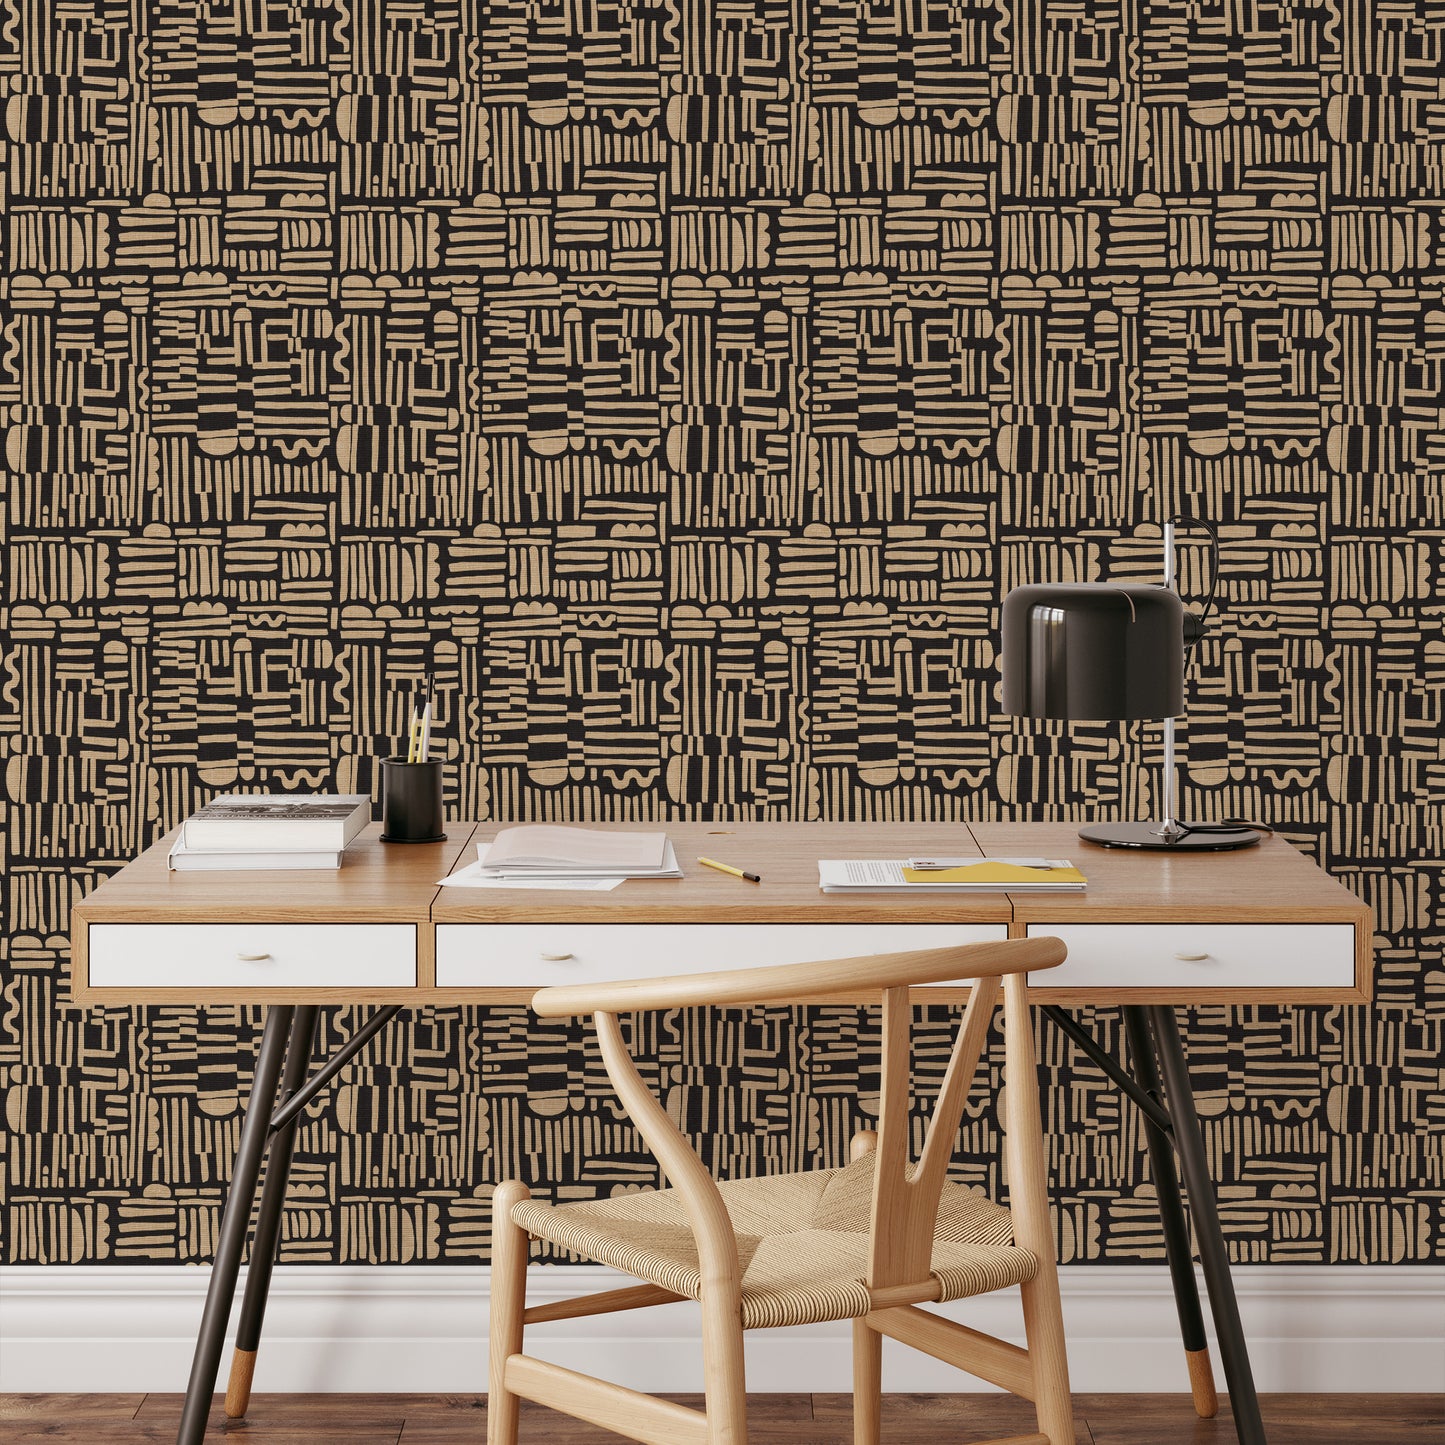 Introducing the statement wallpaper of your dreams, Geometric Lines Wallpaper - Charcoal. Feel the avant-garde artistry of this exclusive design as its funky lines add a delightful flair to your walls.